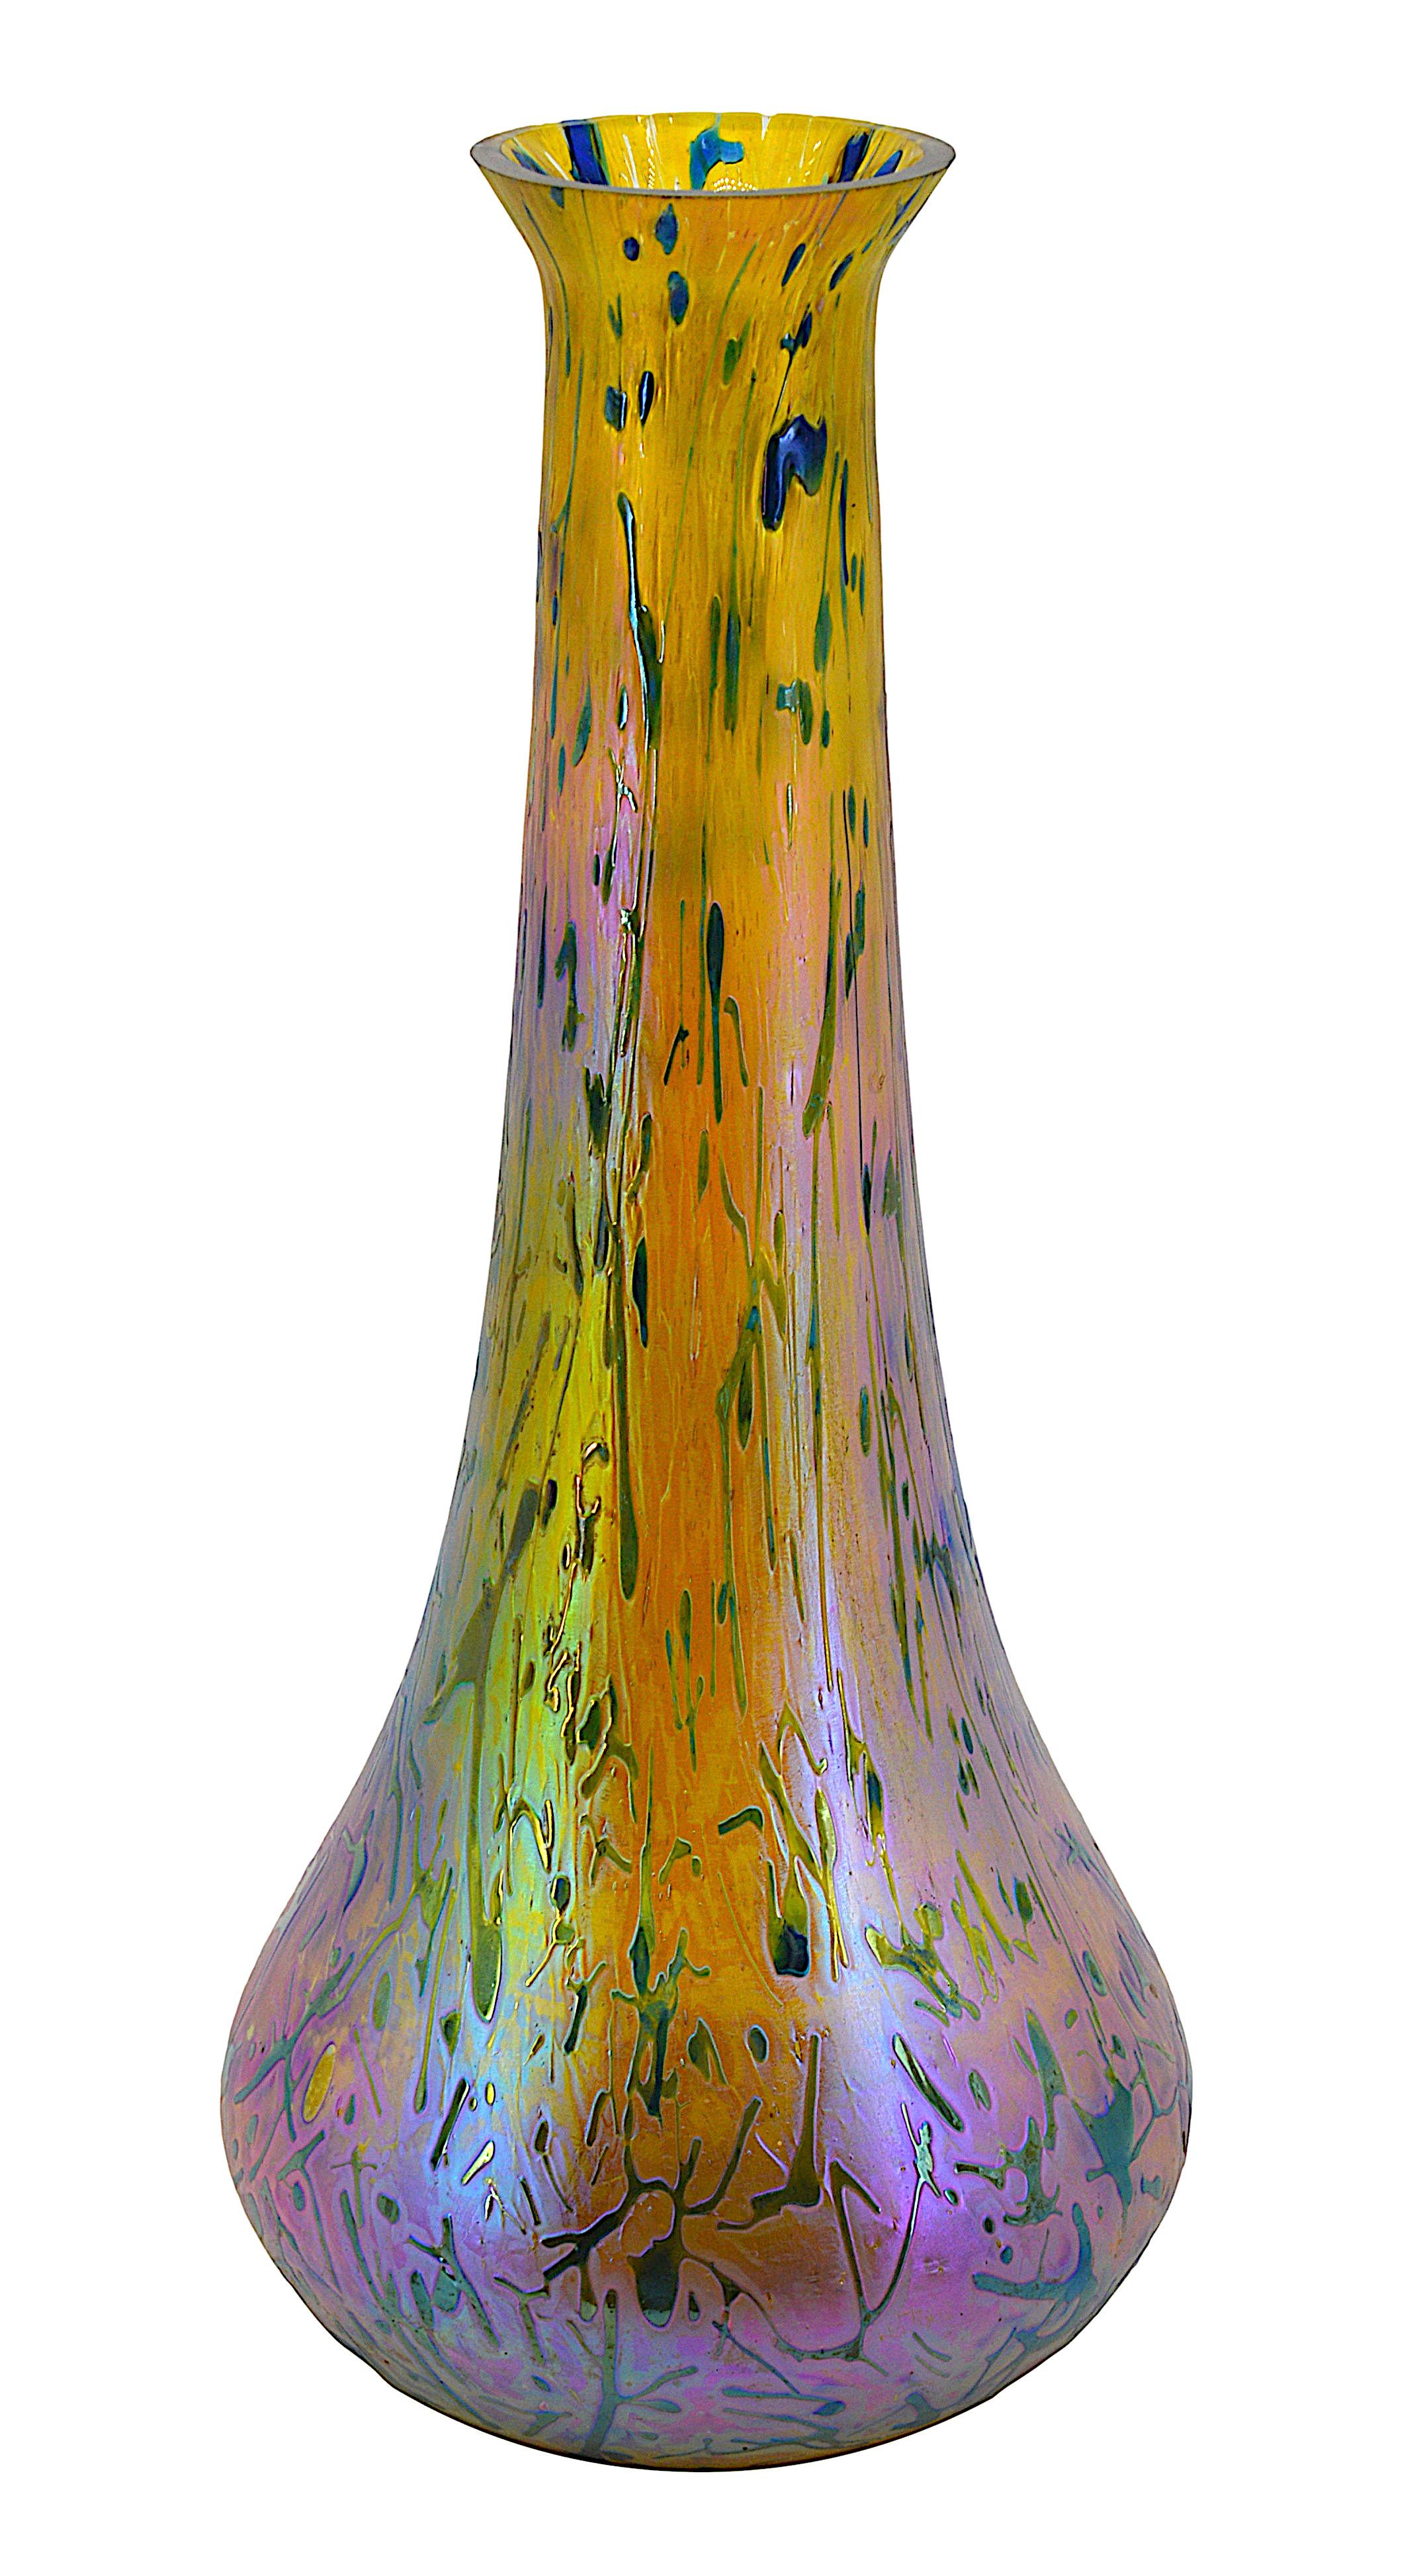 Art Glass vase by Kralik (Bohemia), ca.1900. Eleonorenhain, art glass vase. Colorless glass with ''Eleonorenhain'' decoration in iridescent copper, yellow and violet. Beautiful iridescent cobalt blue effect very difficult to capture on a photo. The